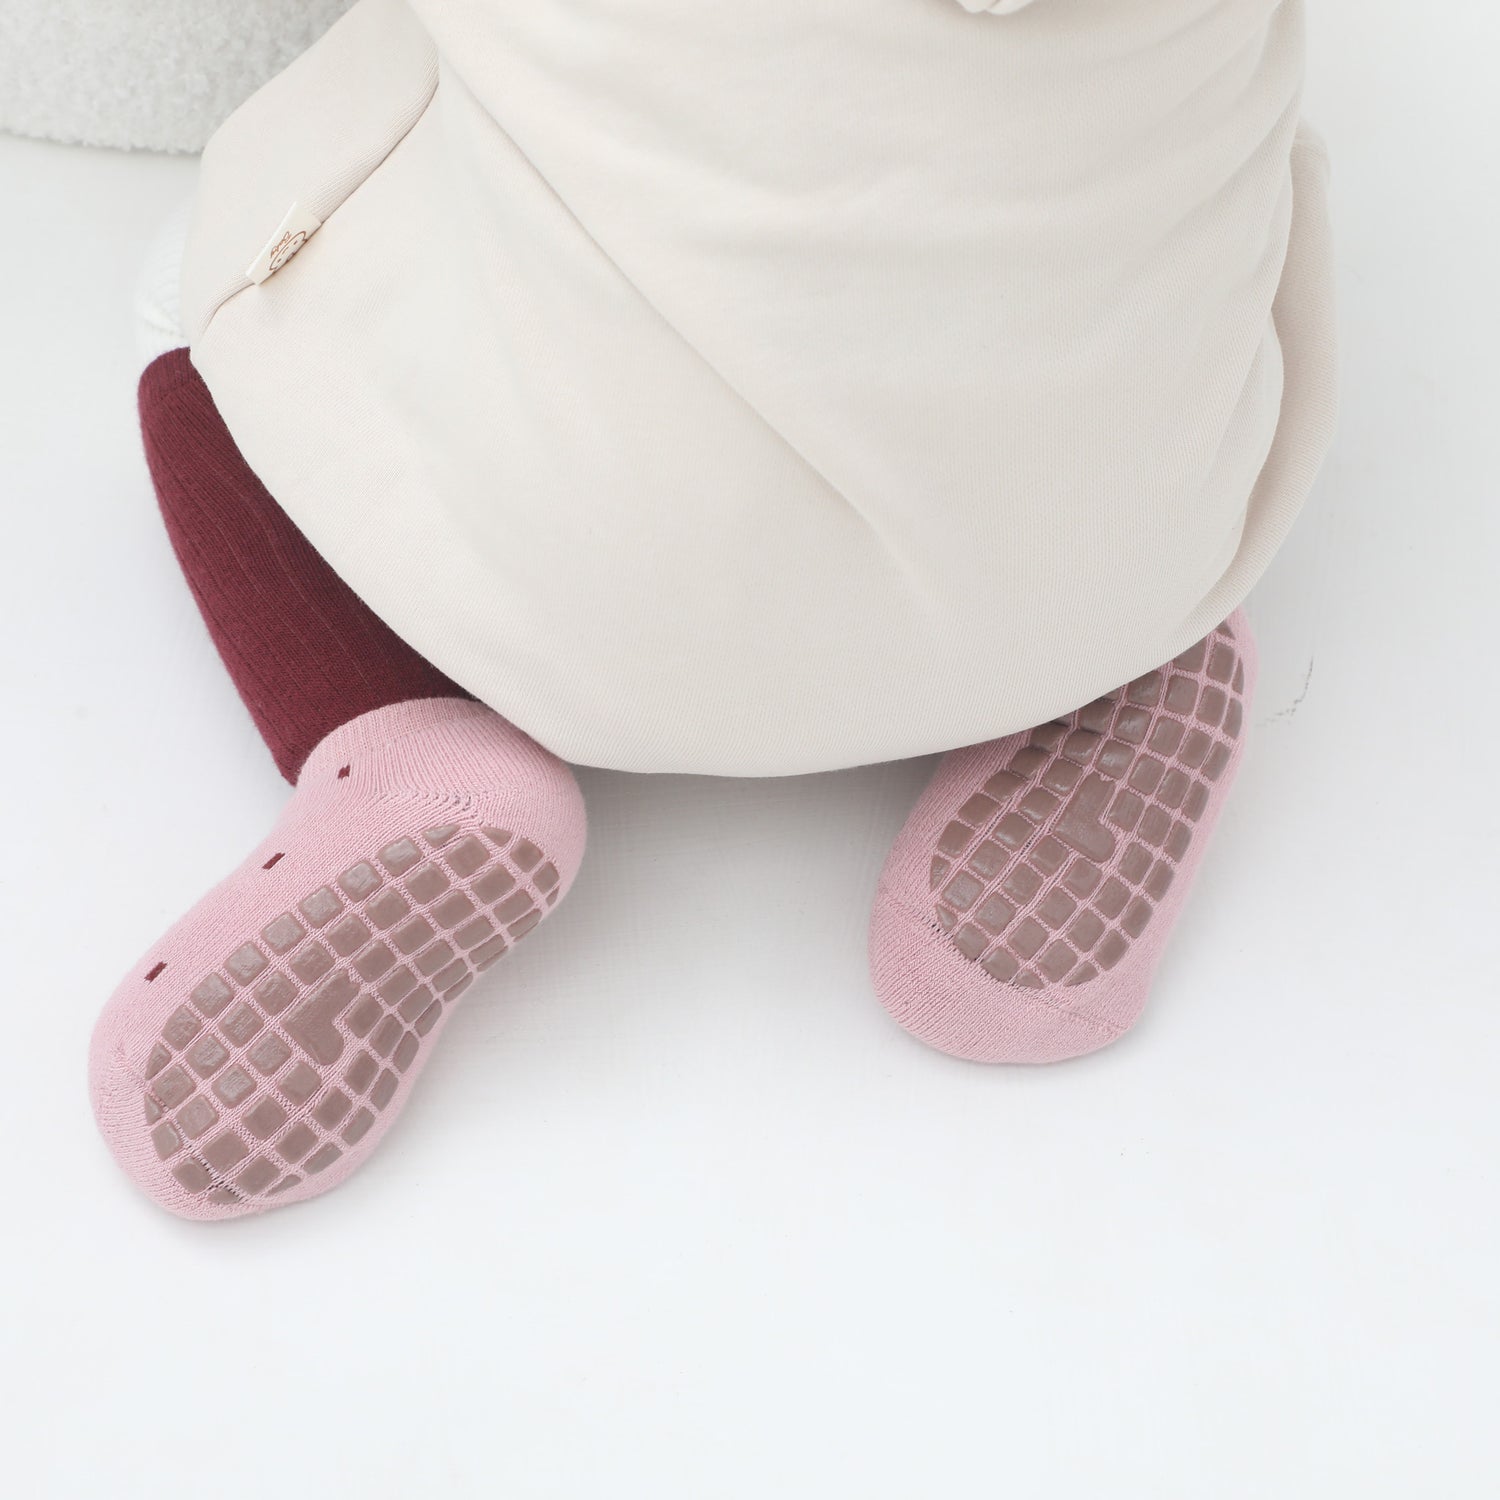 Baby non-skid socks with grips featuring playful patterns